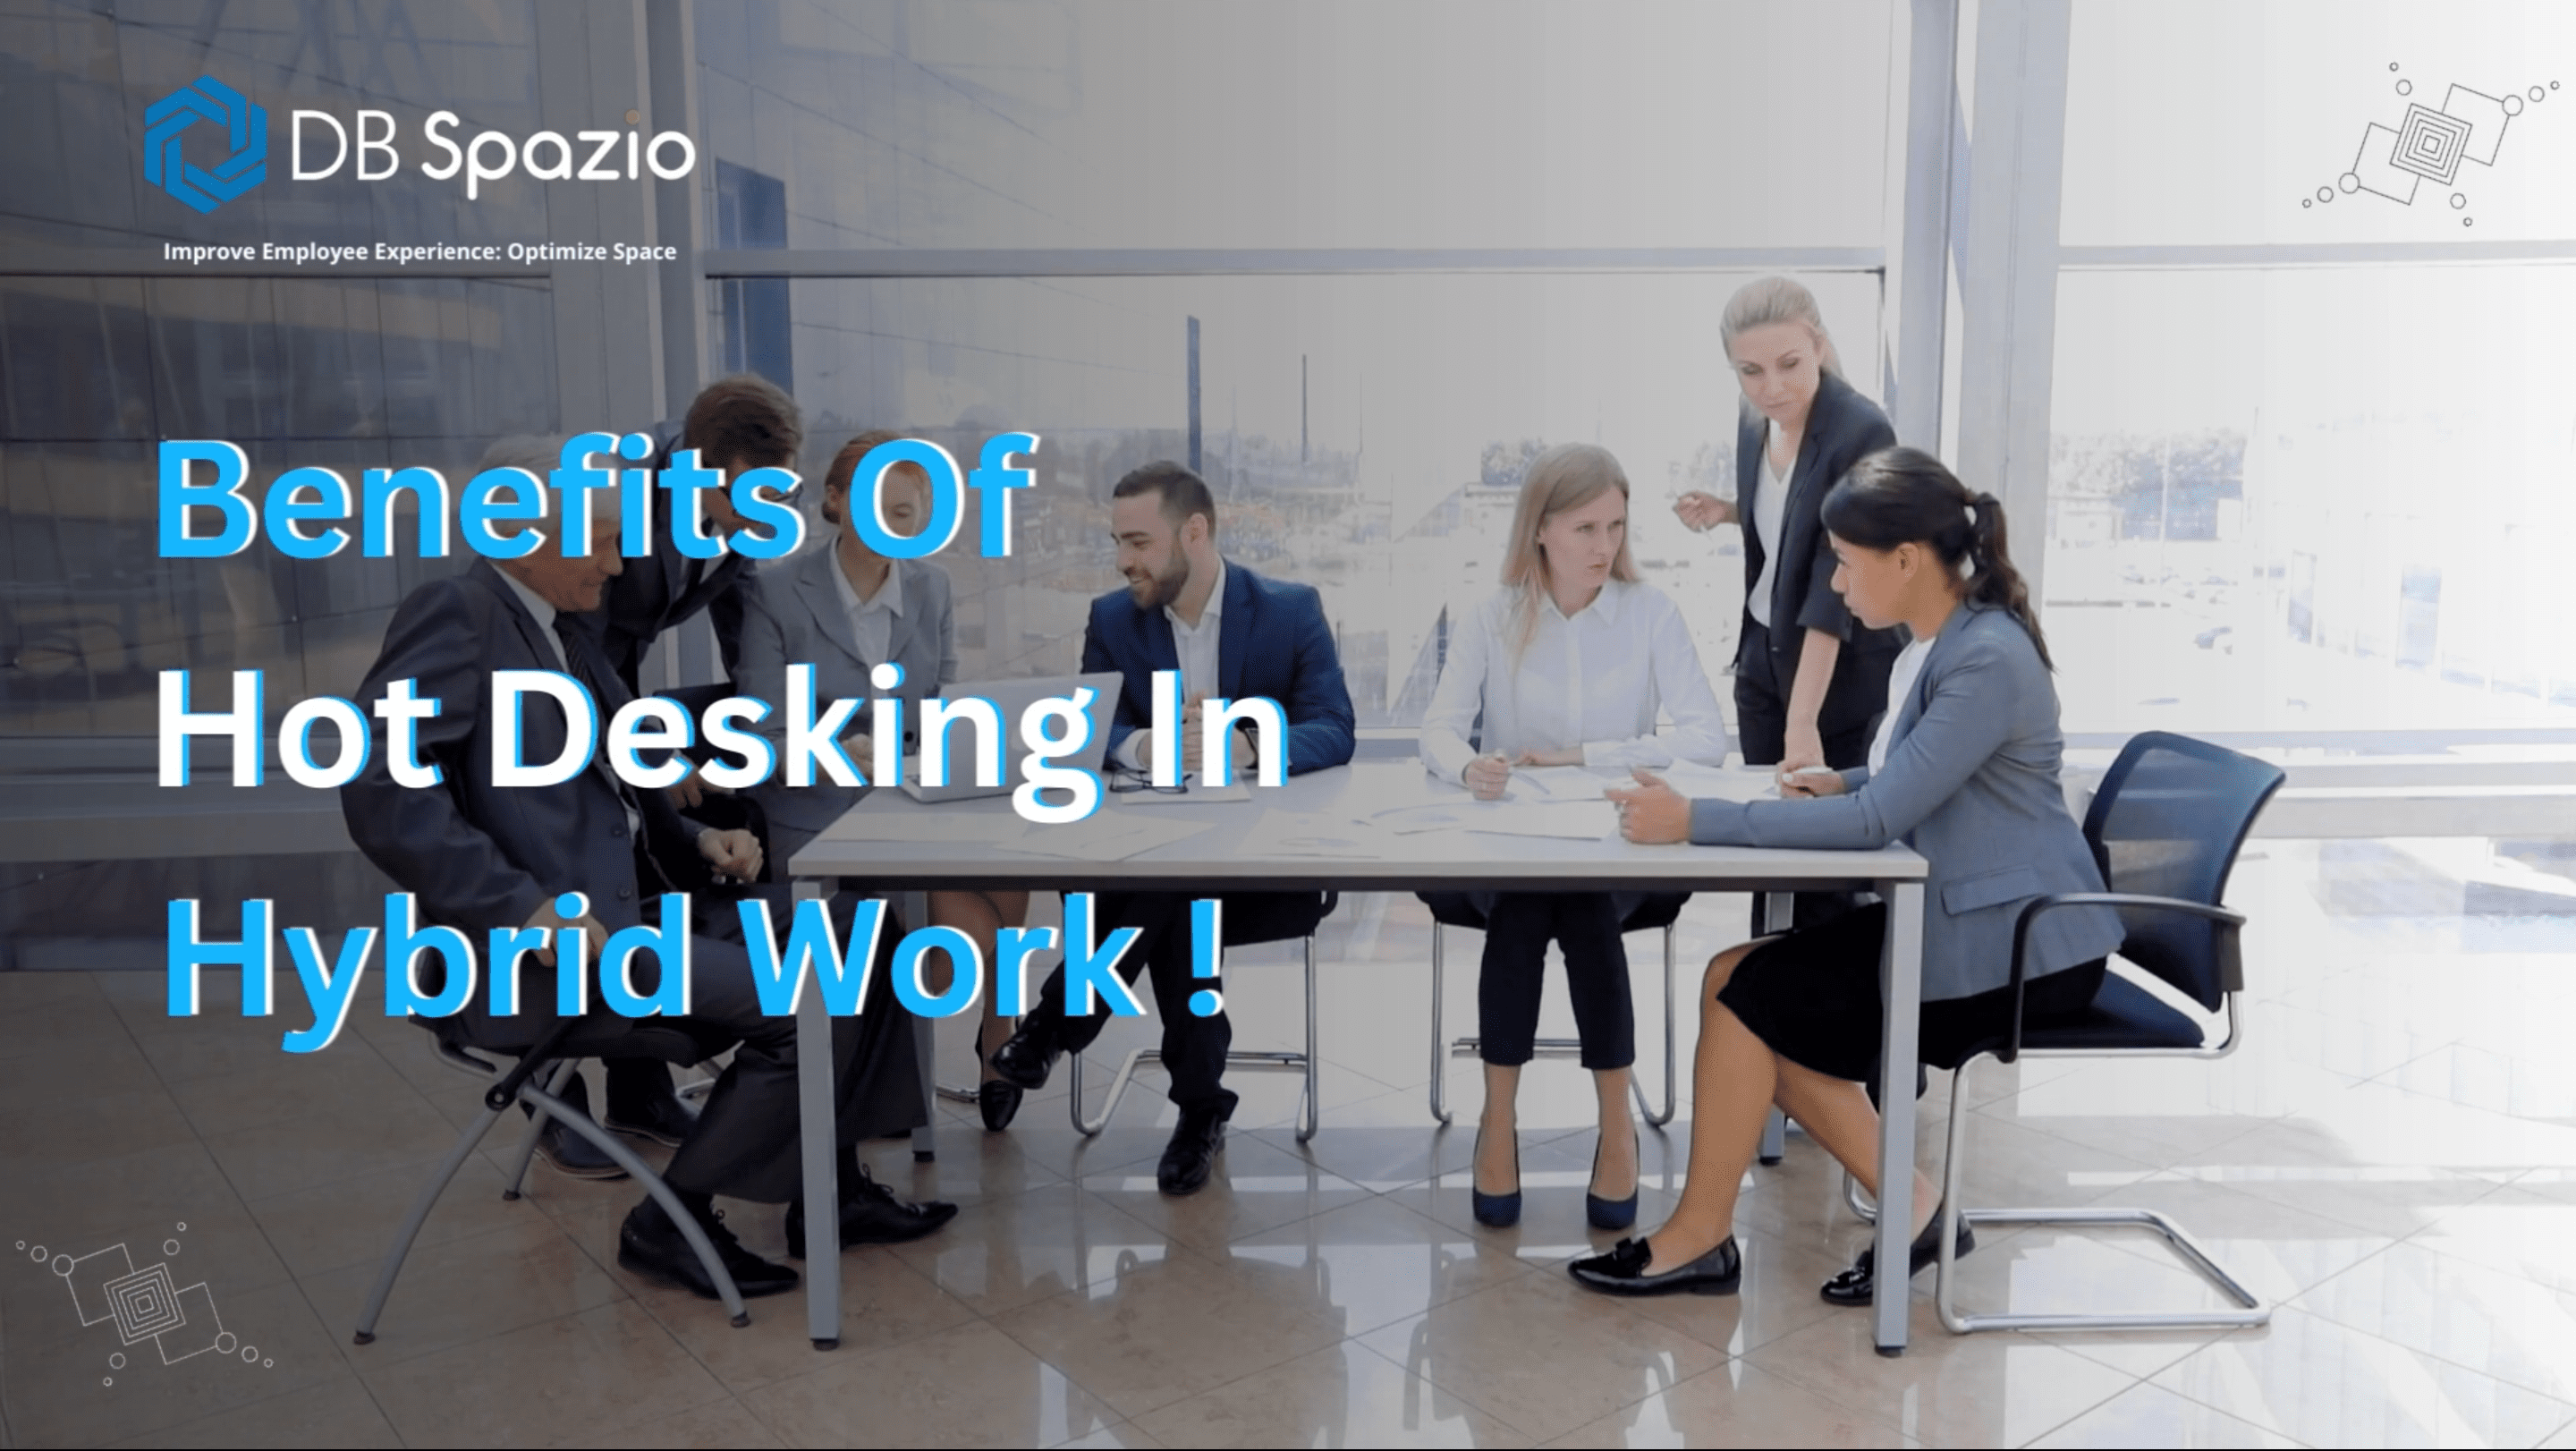 The image is a thumbnail for a Video that shows business leaders discussing the benefits of hot desking in a hybrid work environment.